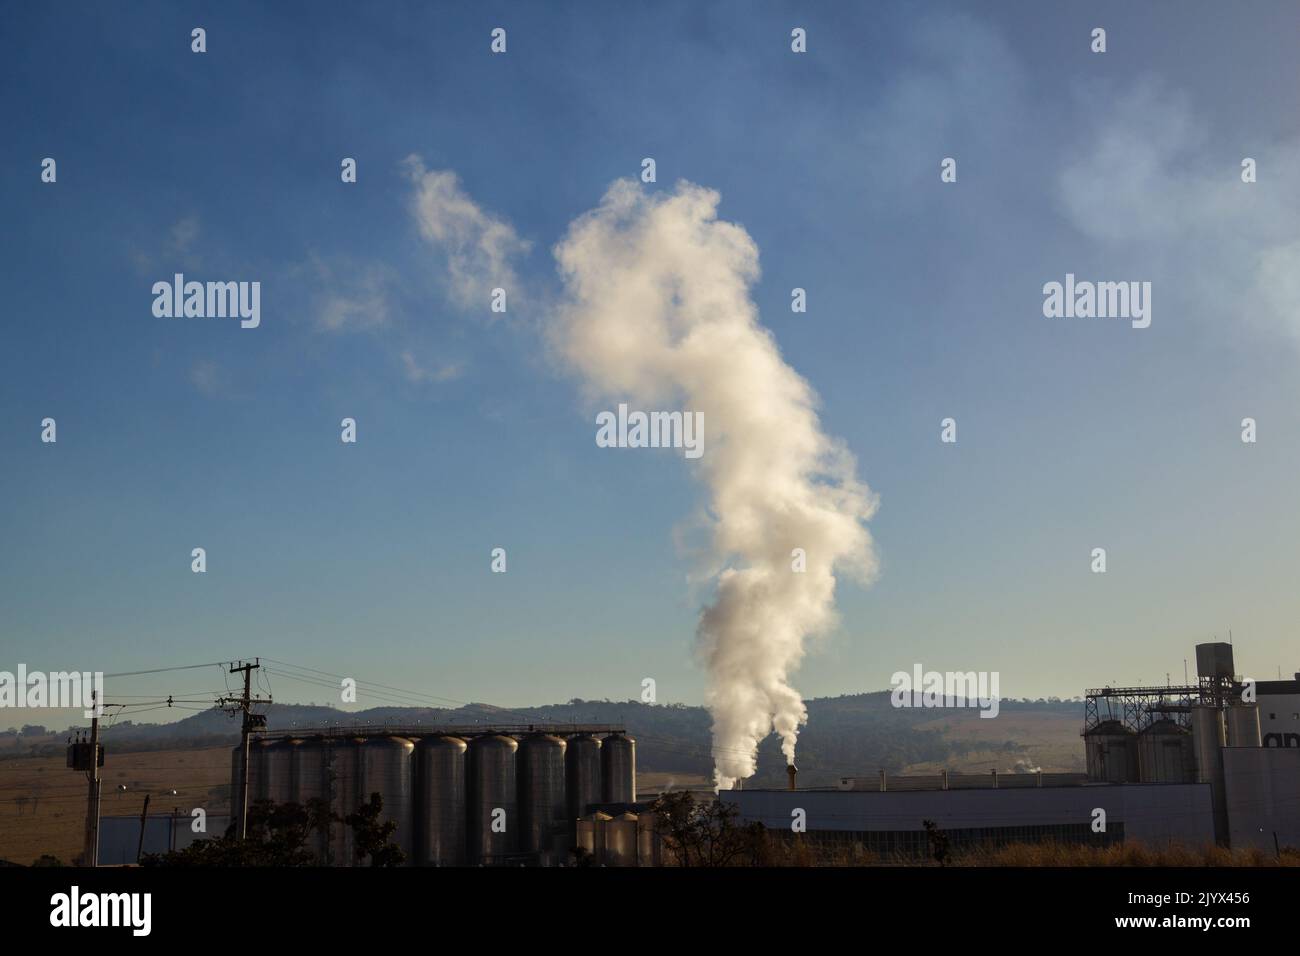 Goiânia, Goias, Brazil – December 25, 2021: Smoke coming out of the factory chimney. Air pollution from smoke coming out of factory chimneys. Stock Photo